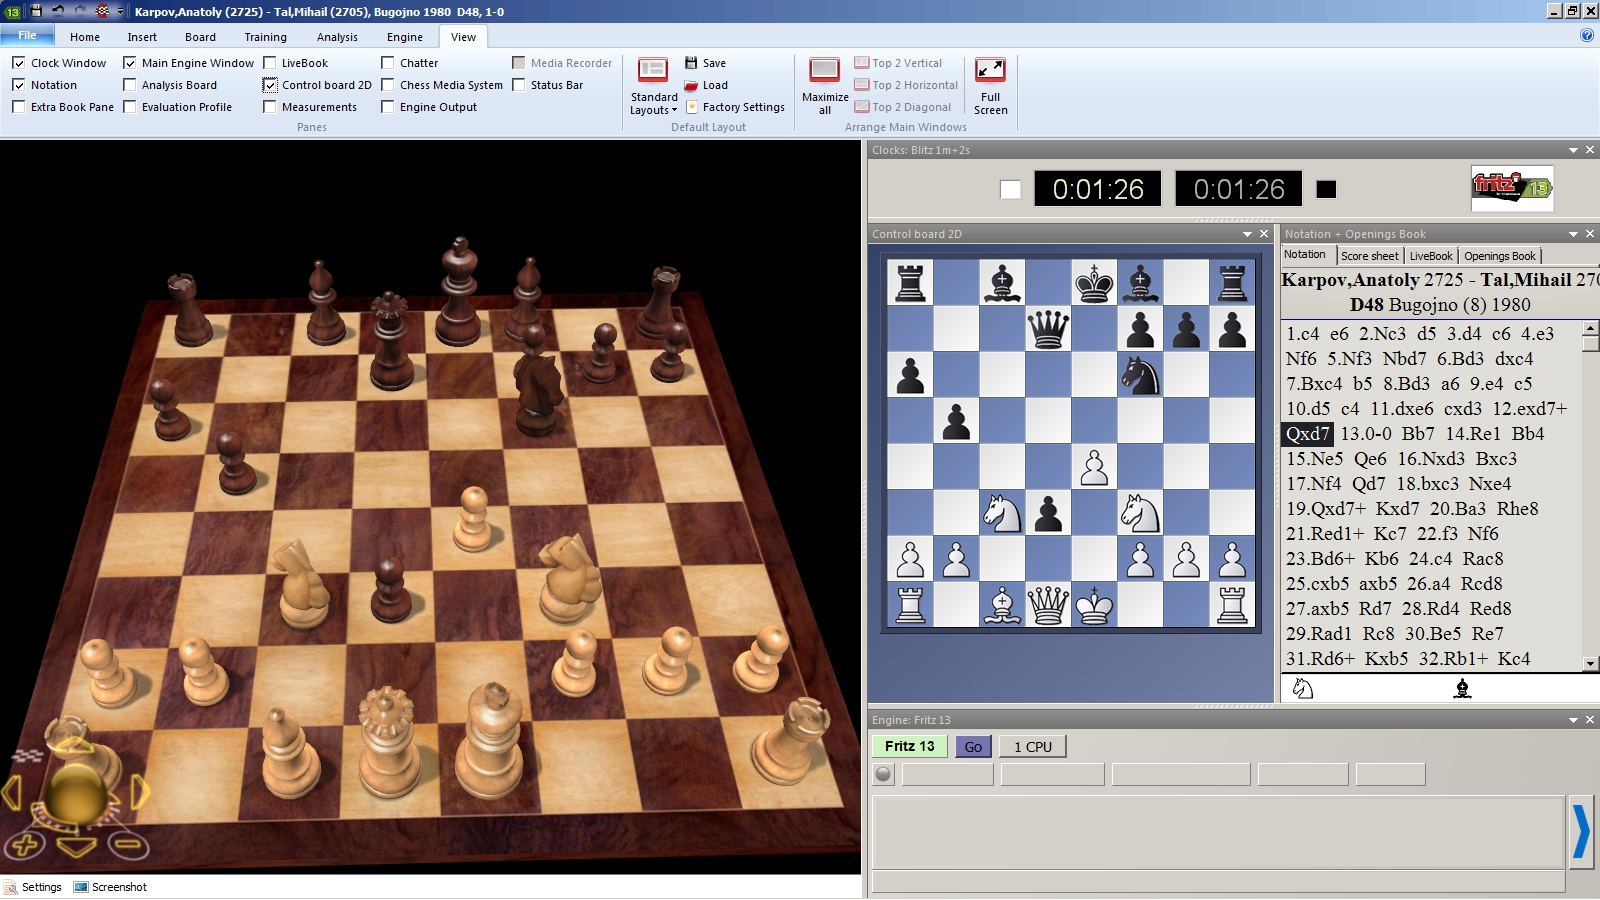 Need Time Control Info in Game Headers! - Chess Forums 